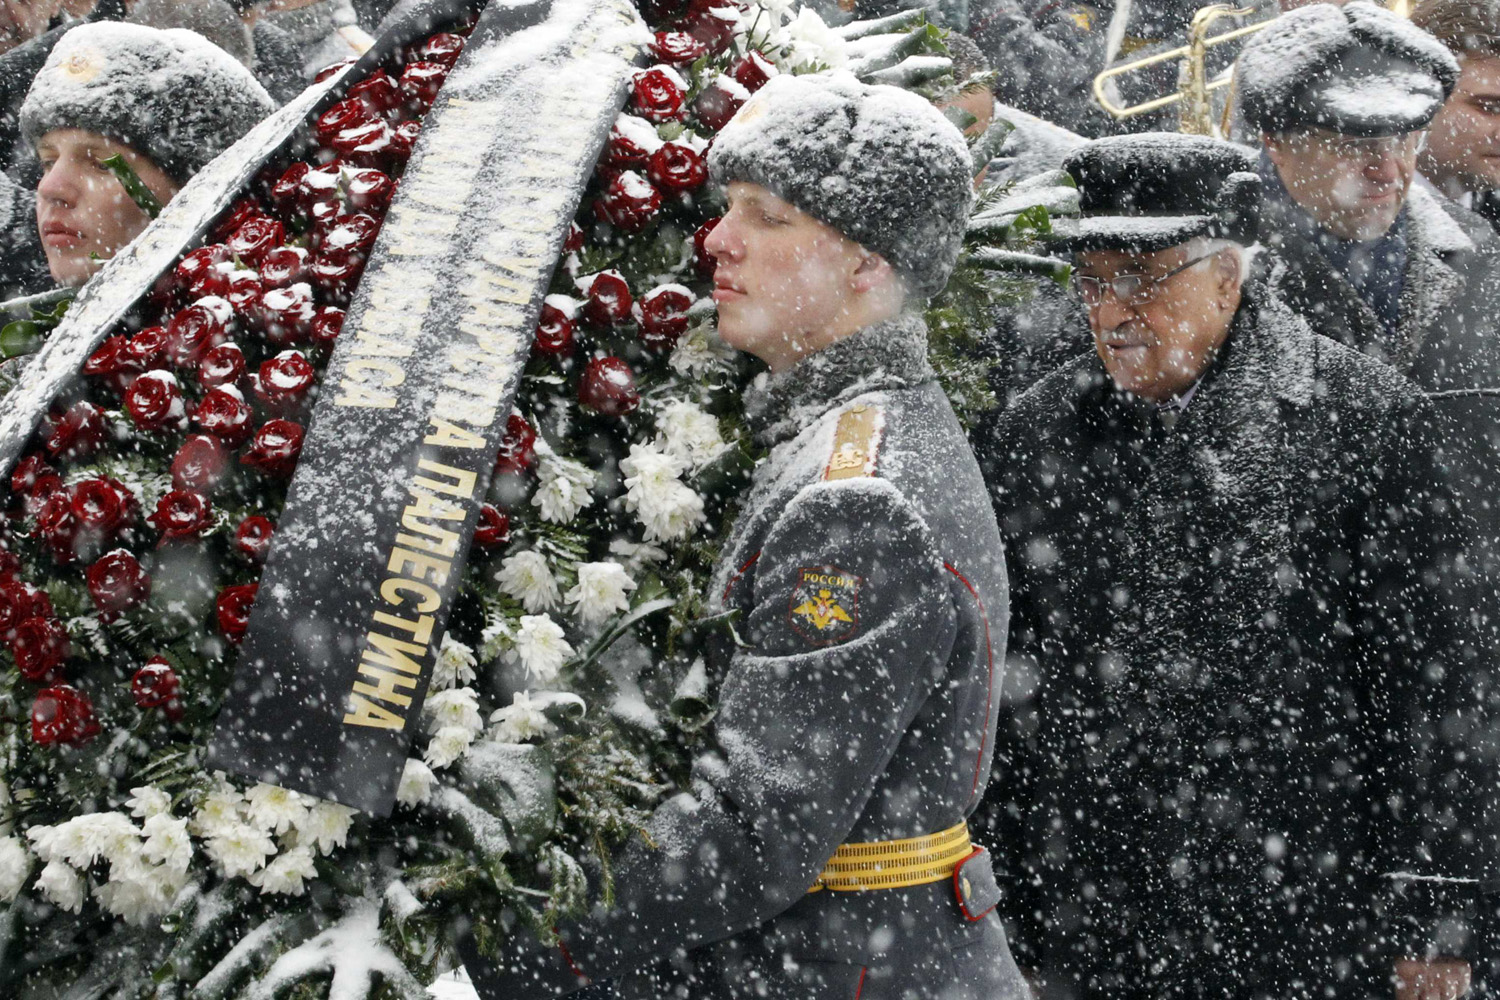 Palestinian President Mahmoud Abbas takes part in a wreath laying ceremony under a heavy snowfall at the Tomb of the Unknown Soldier near the walls of Moscow's Kremlin